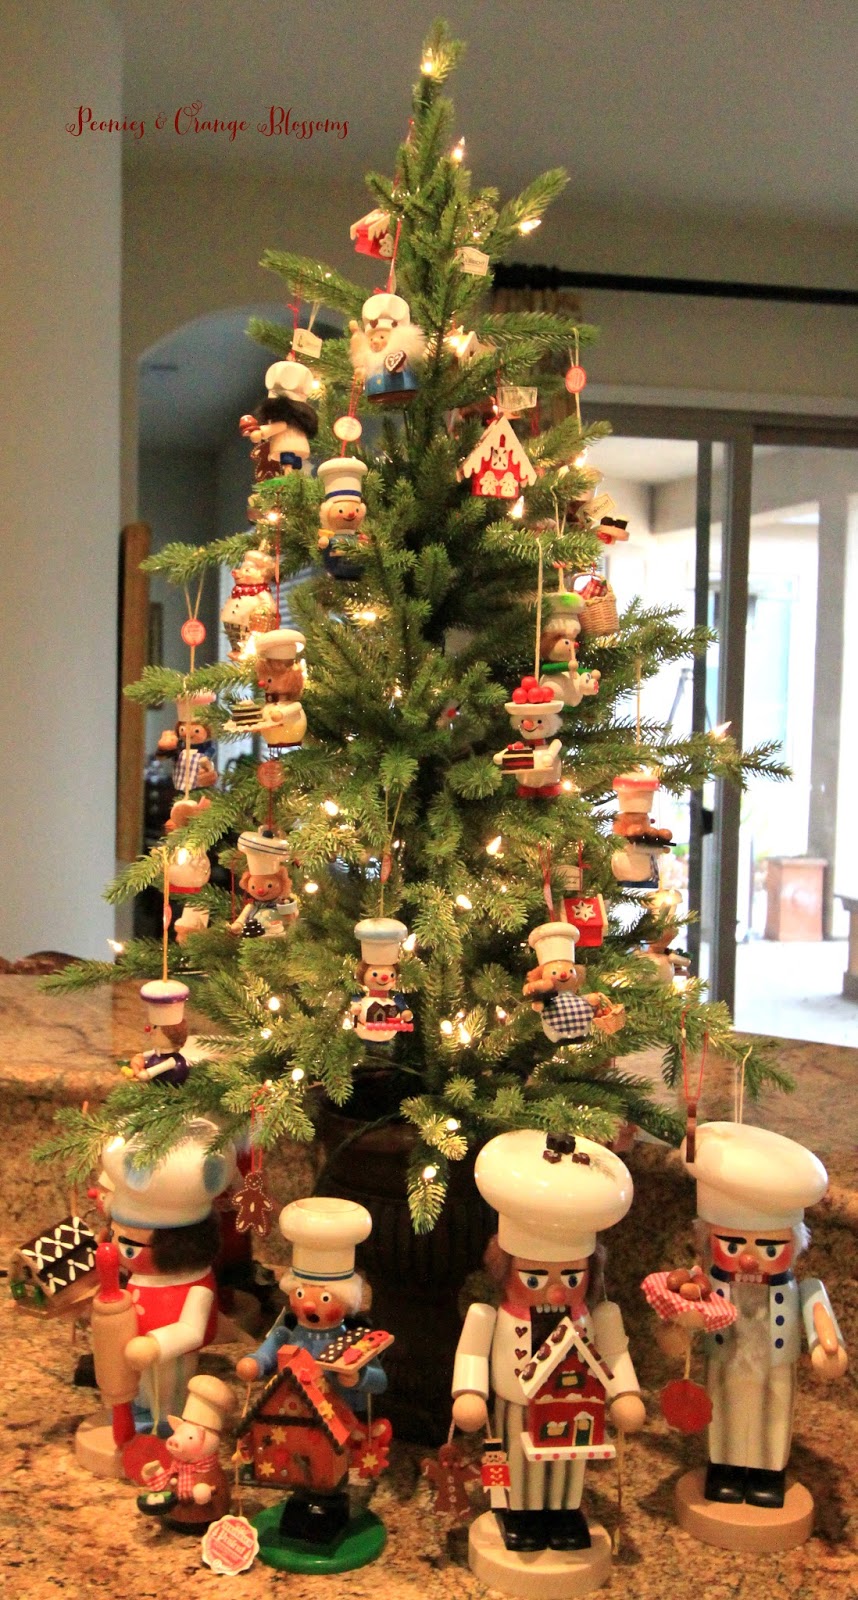 How to Decorate a Kitchen Christmas Tree